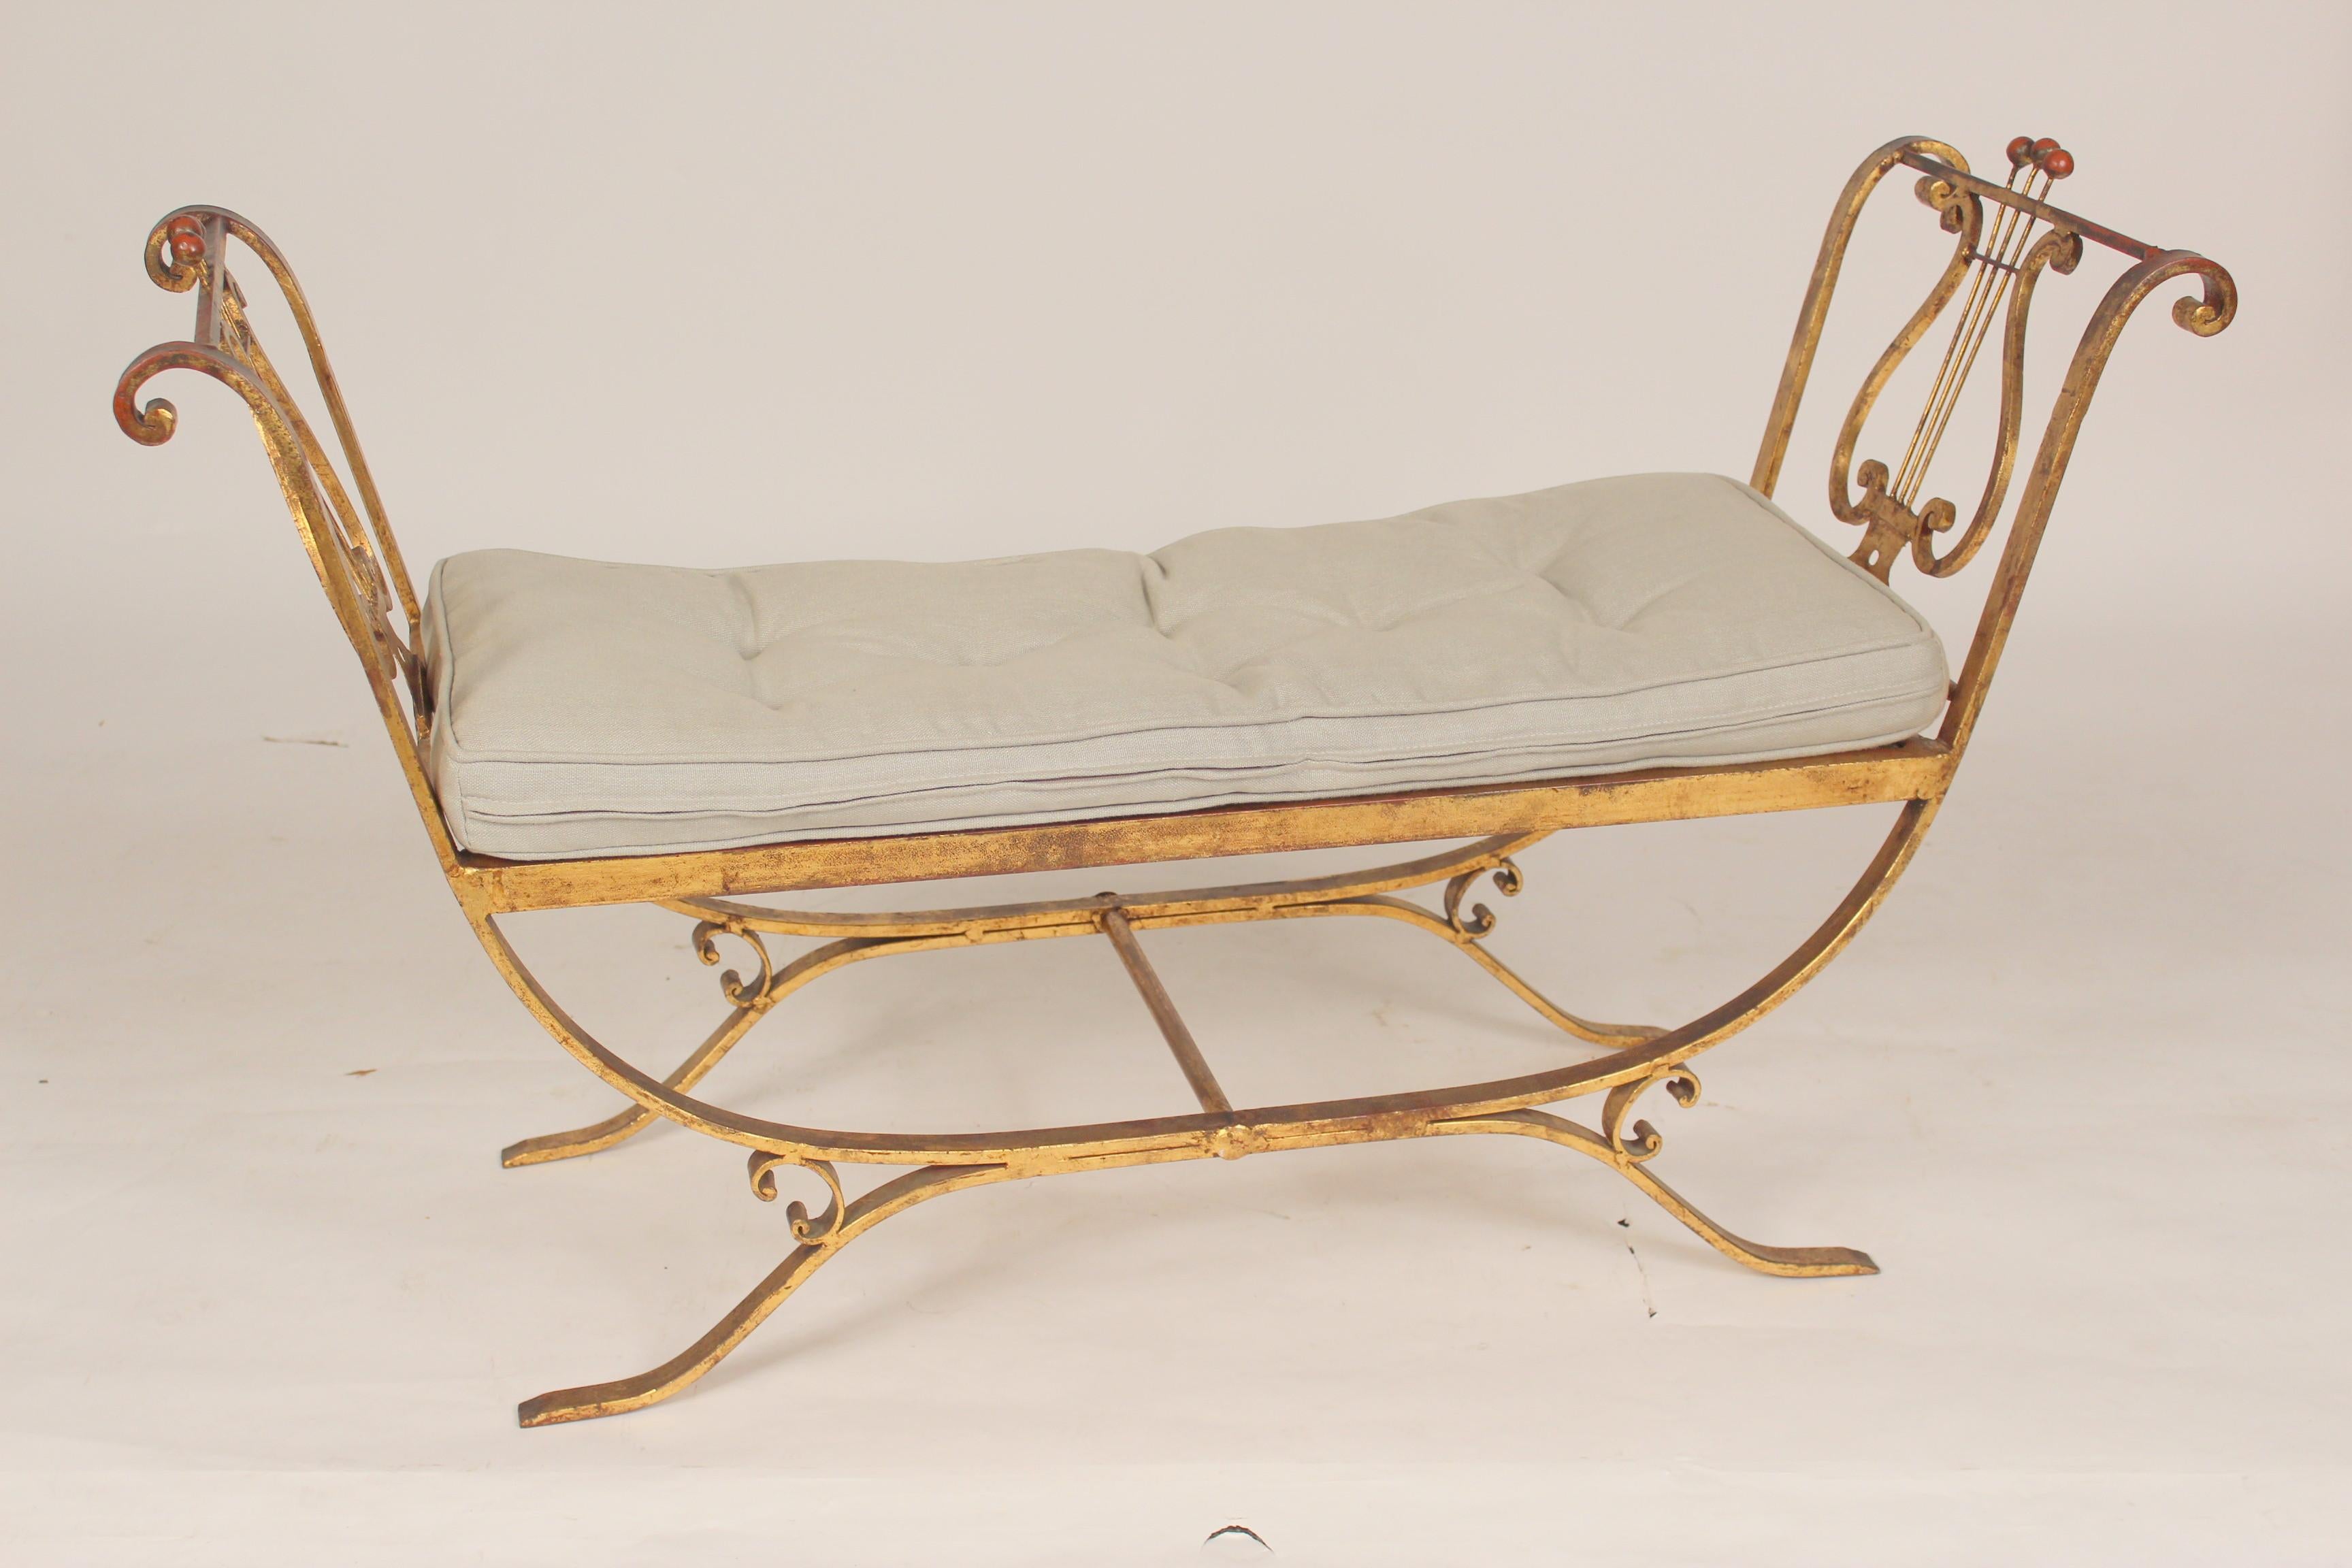 Neoclassical Neo Classical Style Gilt Iron Bench